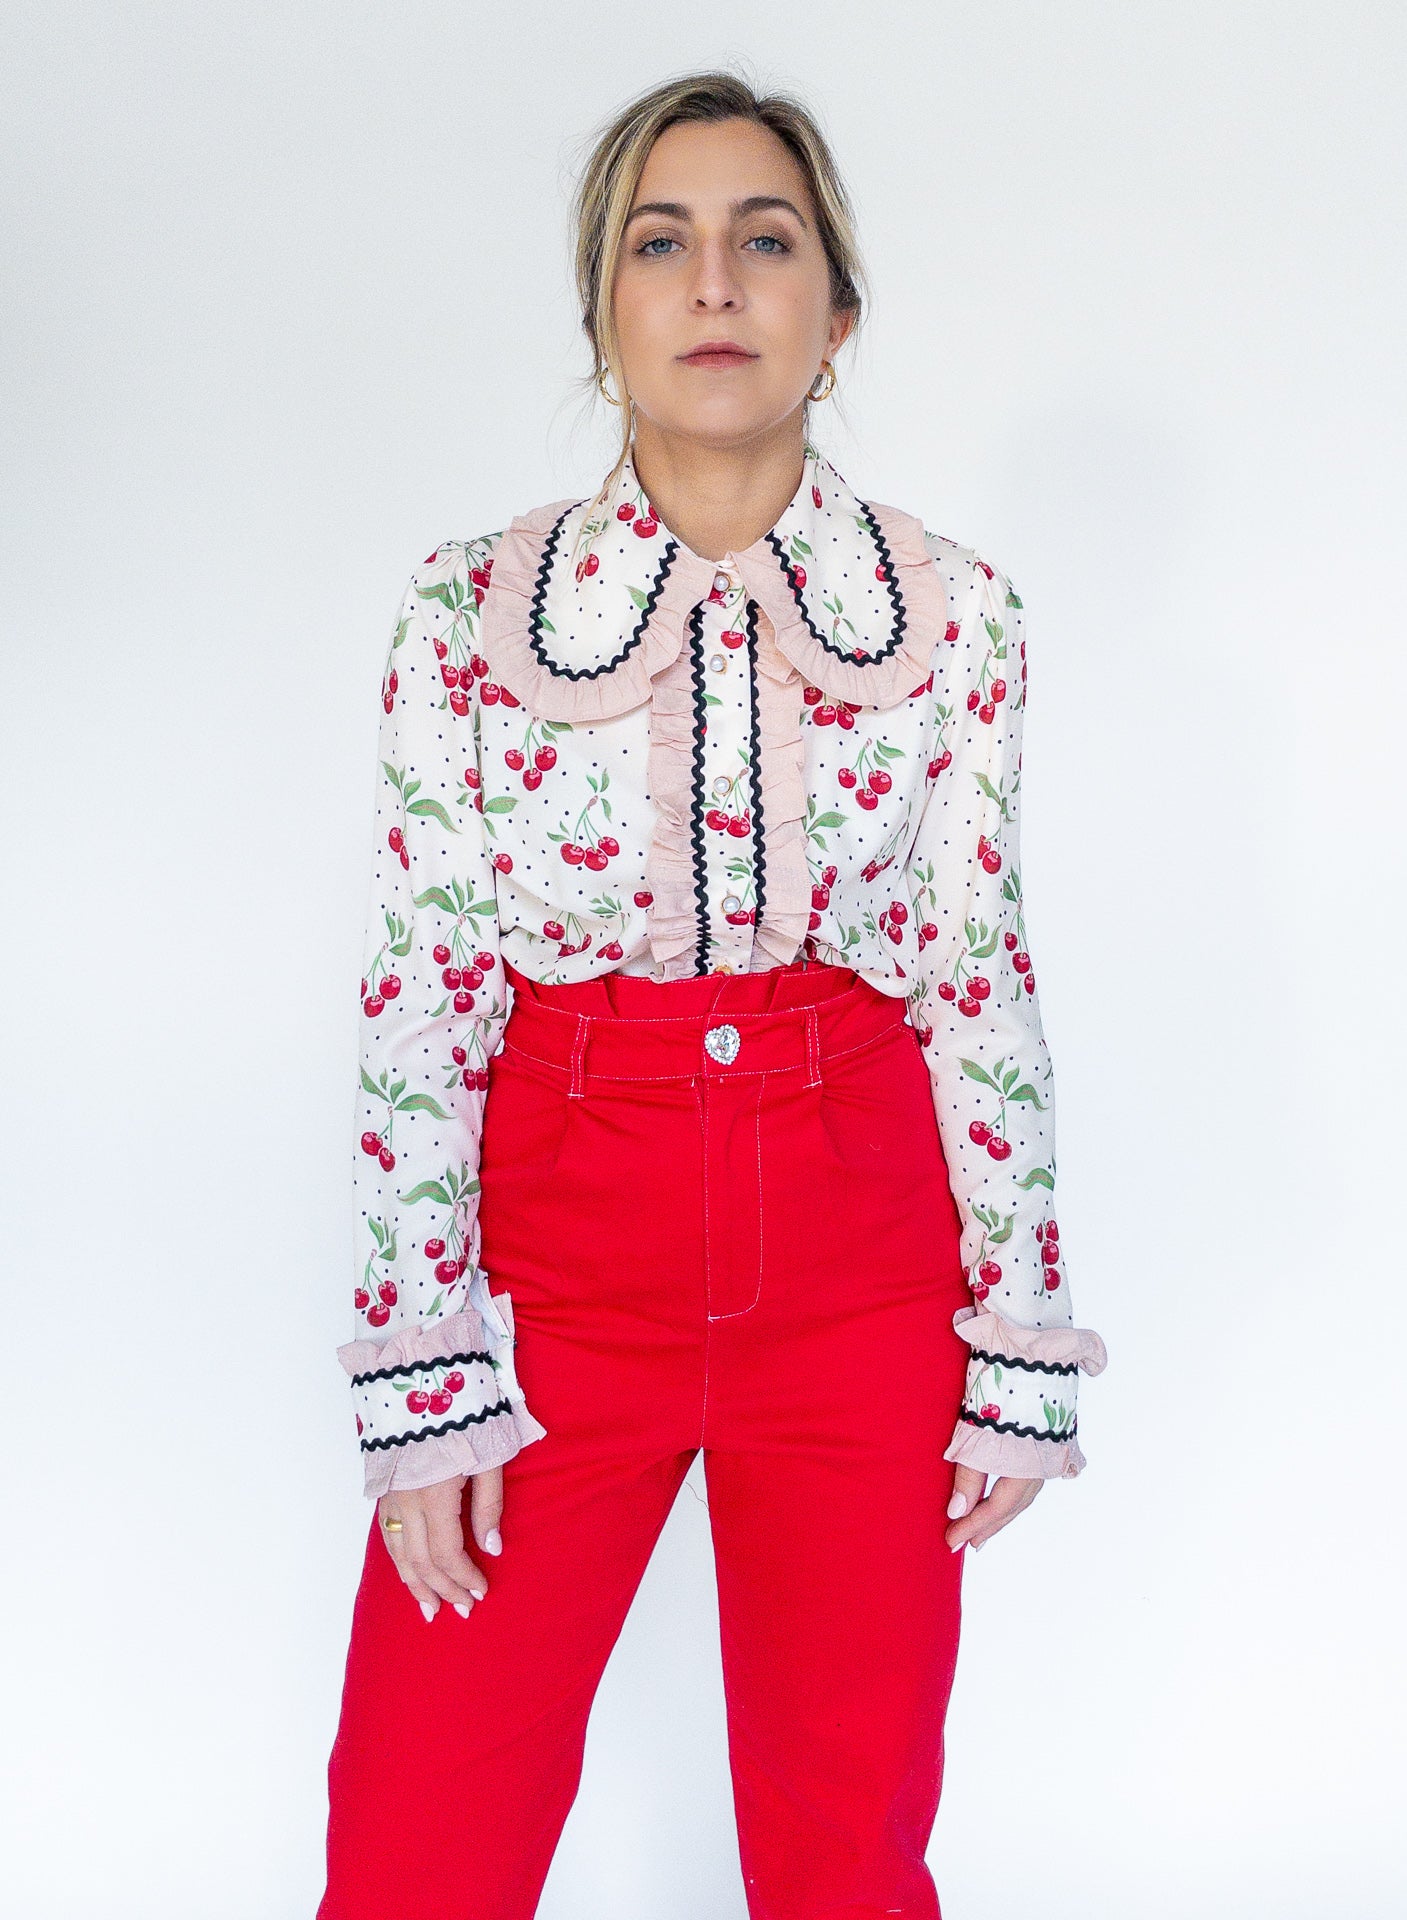 sister jane, high rise red trousers, hearts, heart-pockets, red pants, women&#39;s pants, women&#39;s apparel, fashion, ethically made, curate